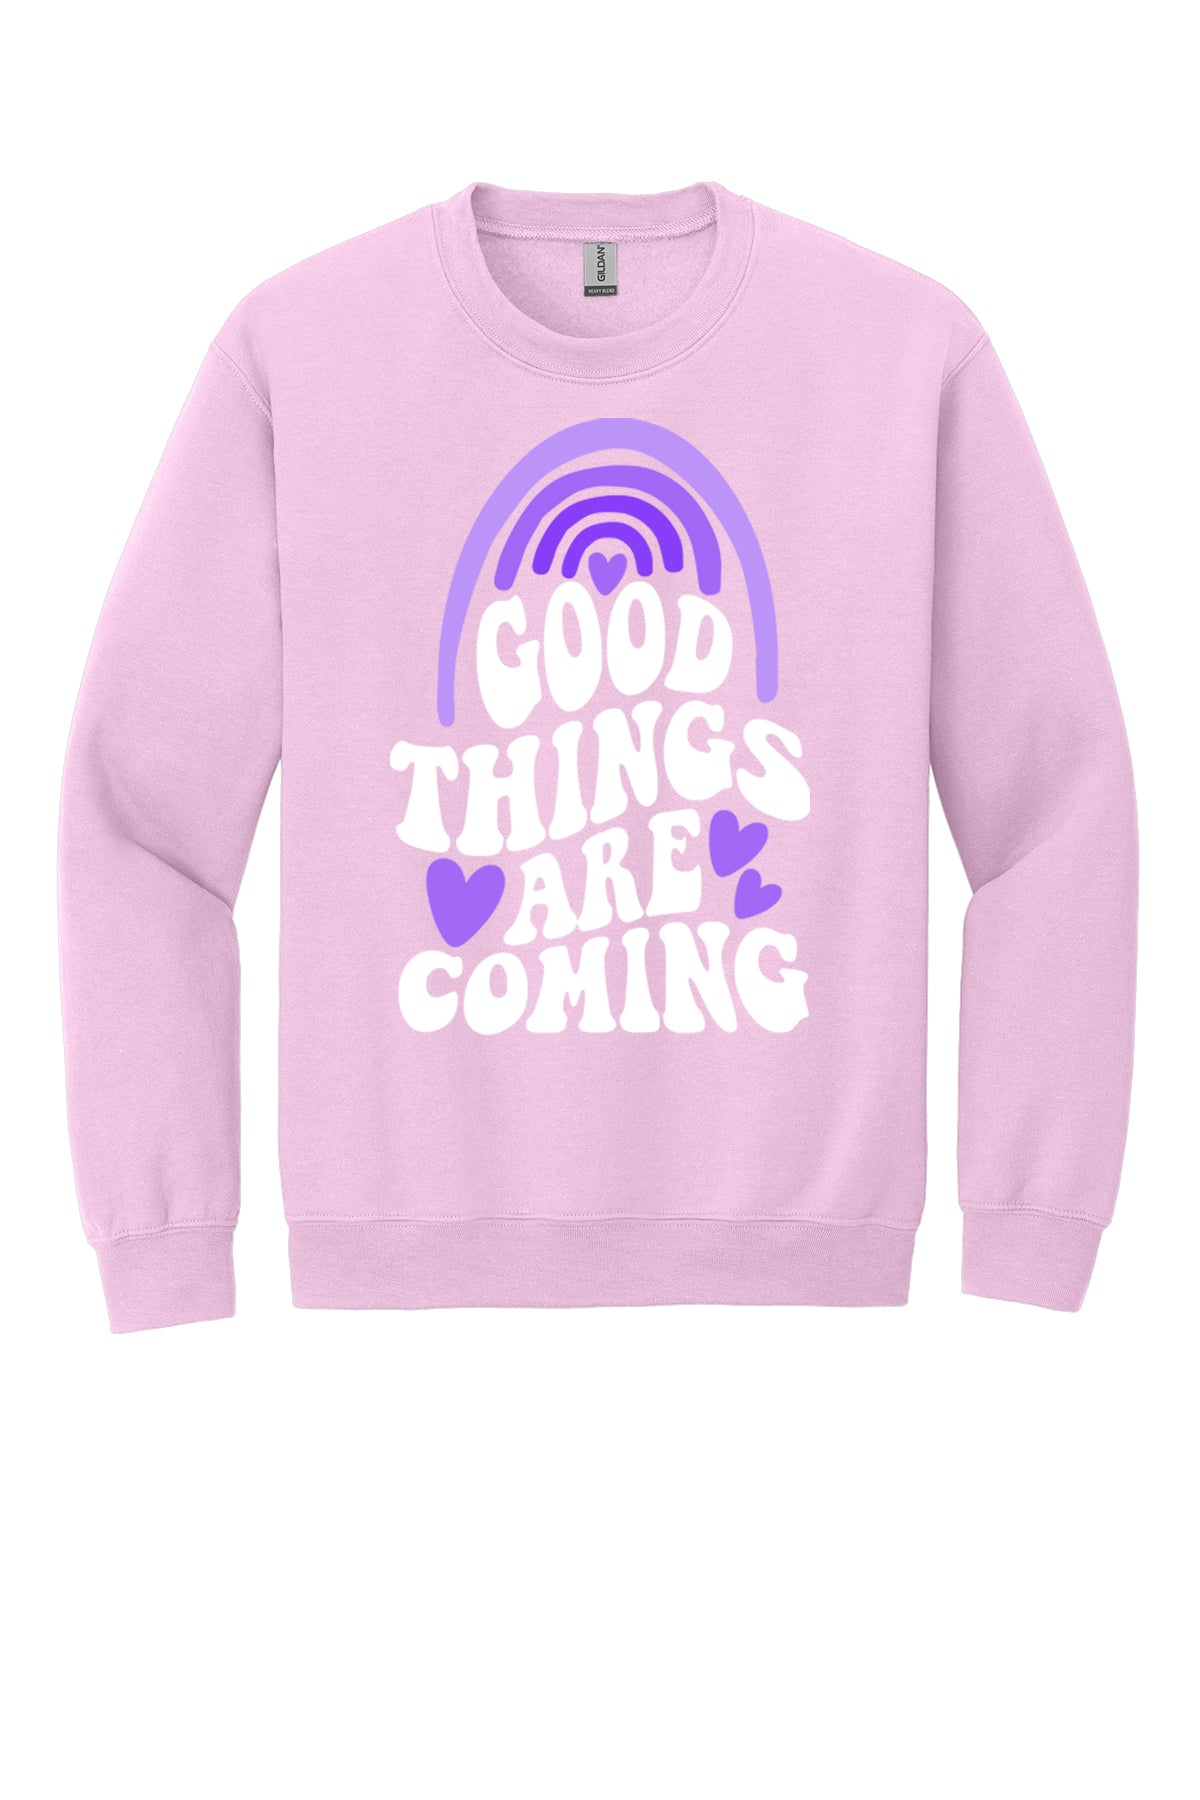 'Good Things Are Coming' Graphic Sweatshirt: Prep Obsessed x Weather With Lauren (Ships in 2-3 Weeks)